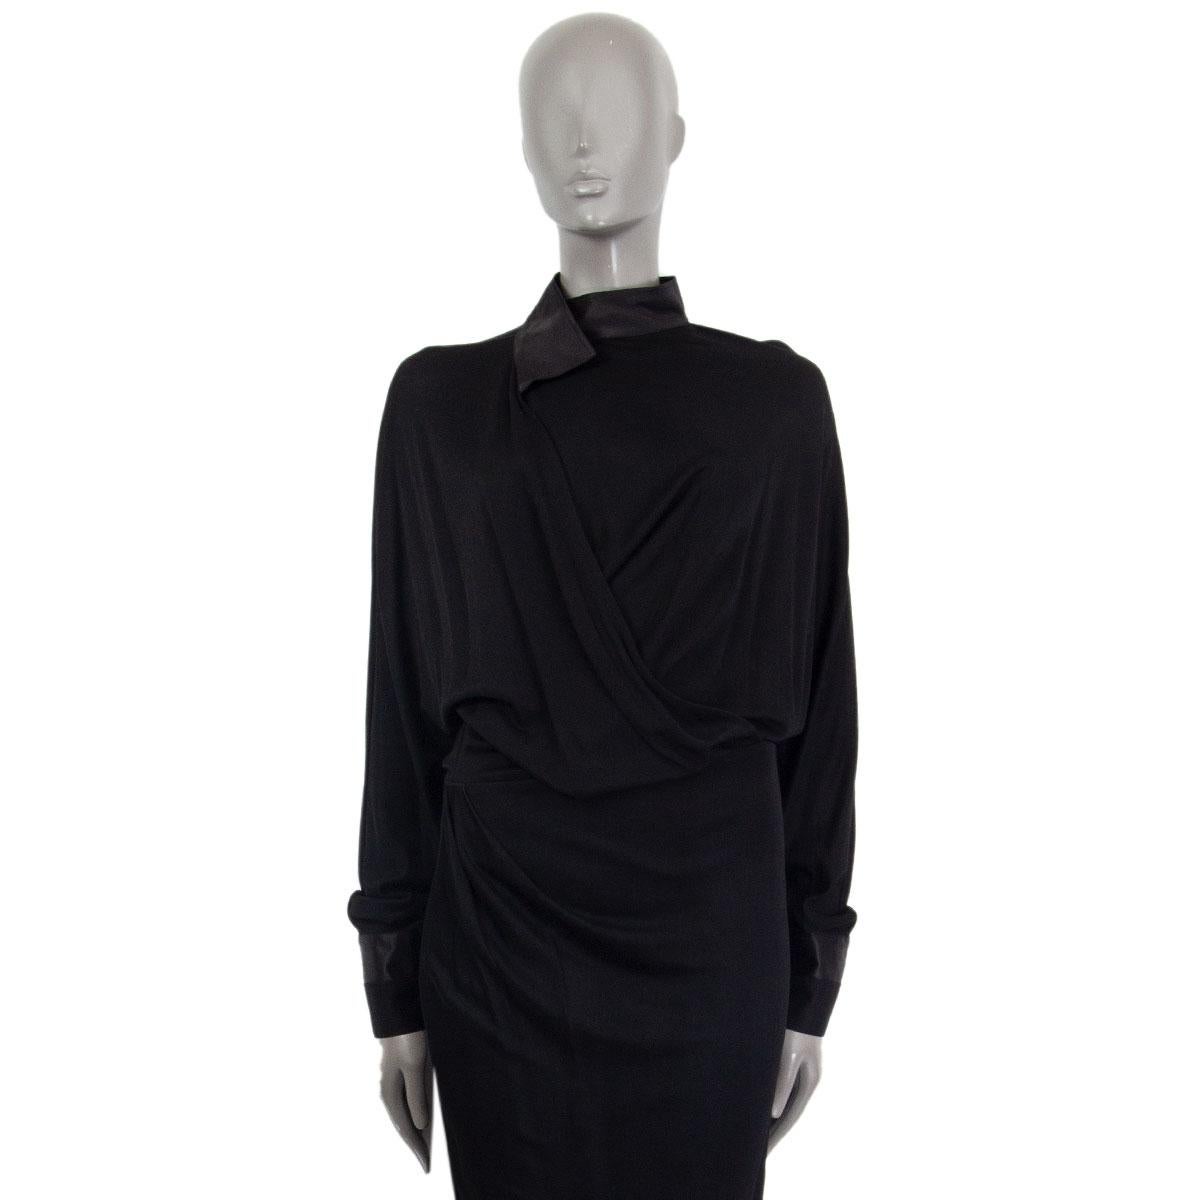 Tom Ford knee-length bat sleeve dress in black viscose (100%) with satin cuffs, collar and side slit in black silk (100%). Has a gathered waist and asymmetric front part. Opens with a zipper on the side. Brand new. 

Tag Size 38 
Size XS
Shoulder